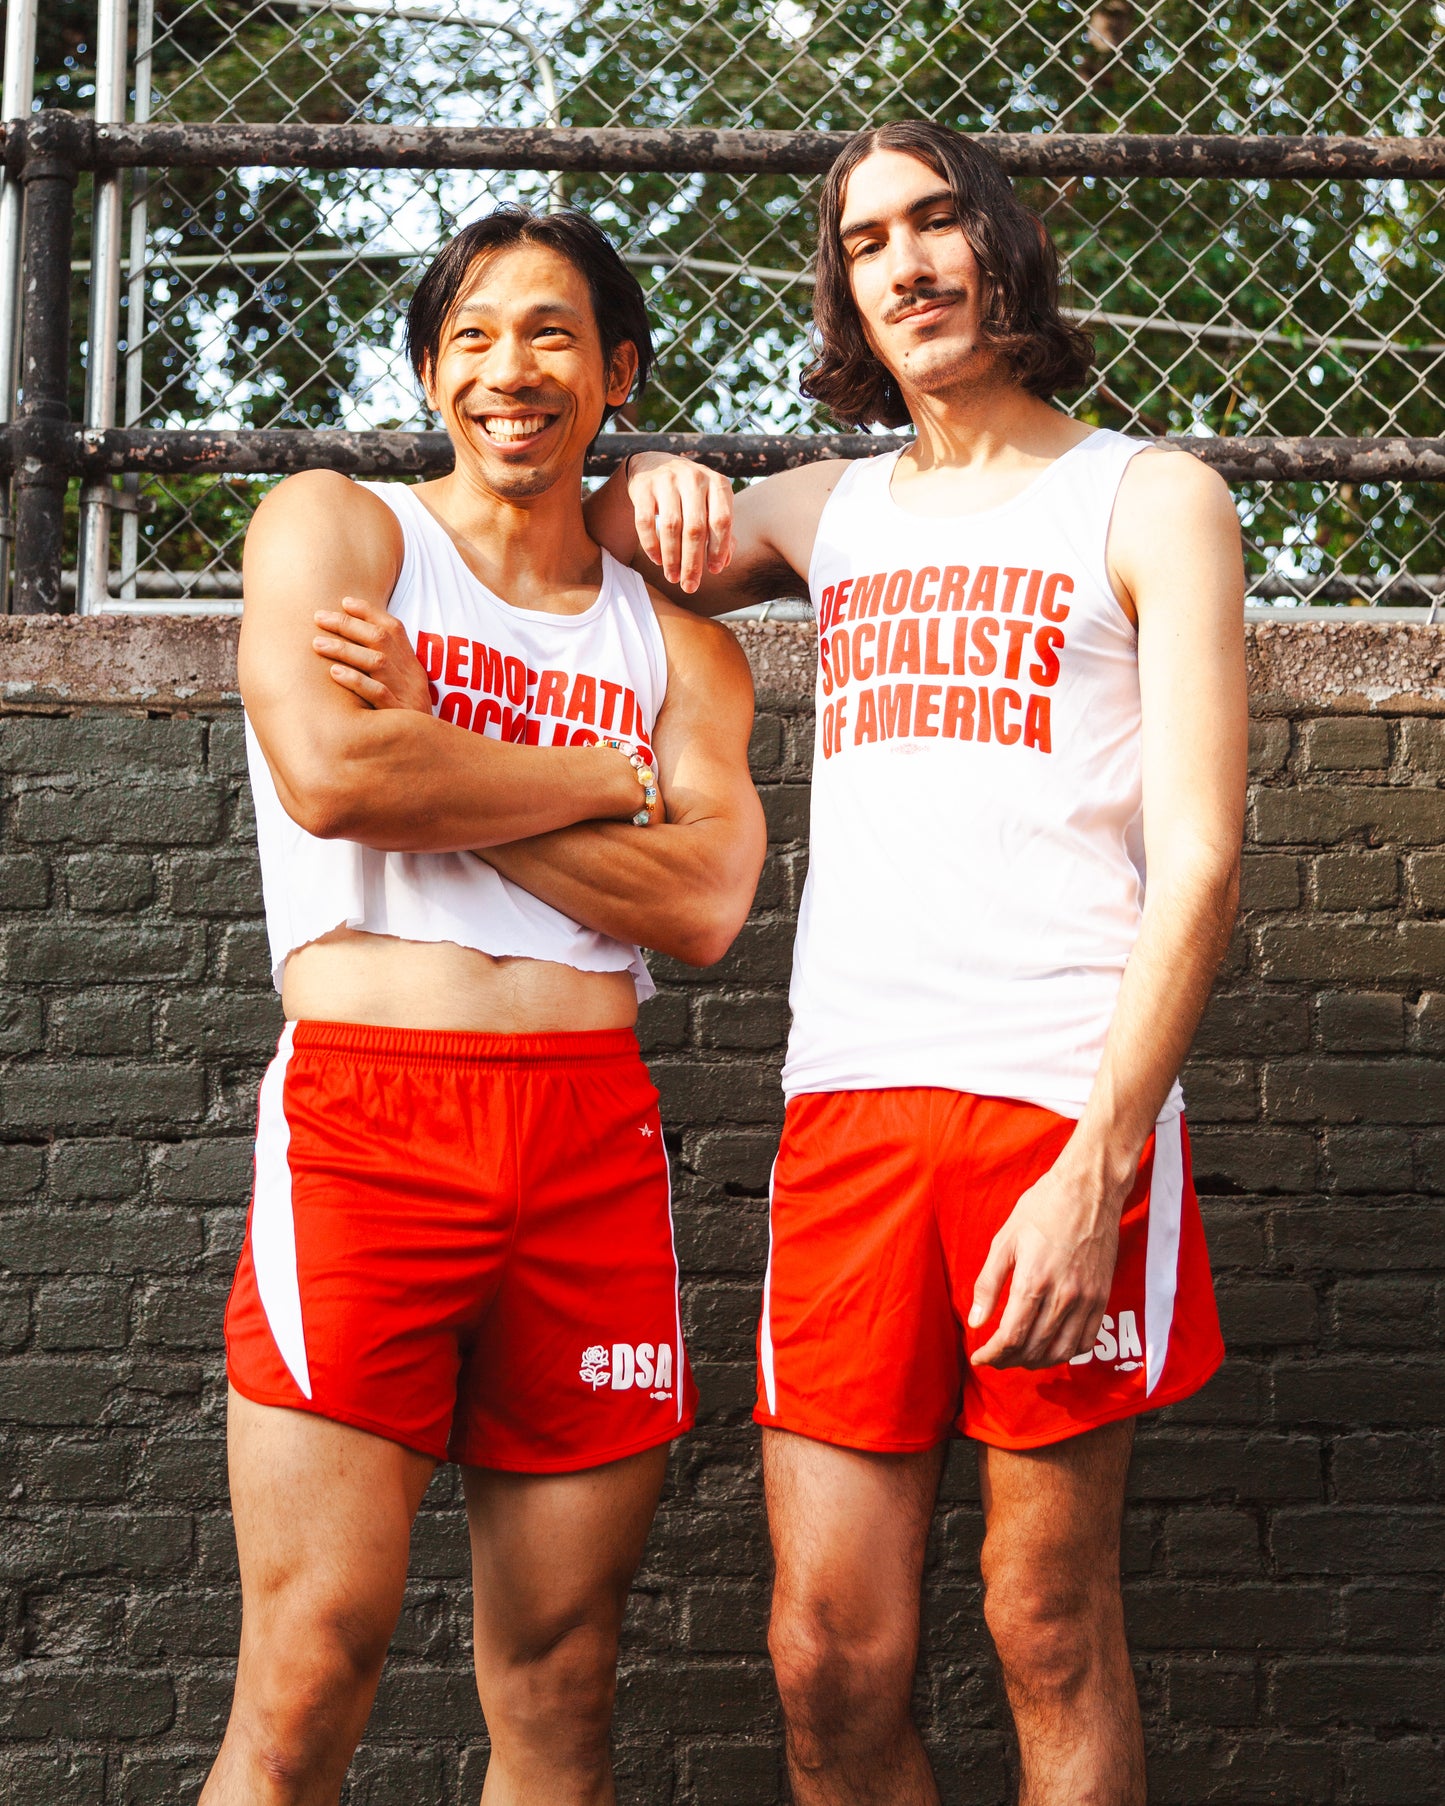 Two socialists in a public park wearing DEMOCRATIC SOCIALISTS OF AMERICA track uniforms